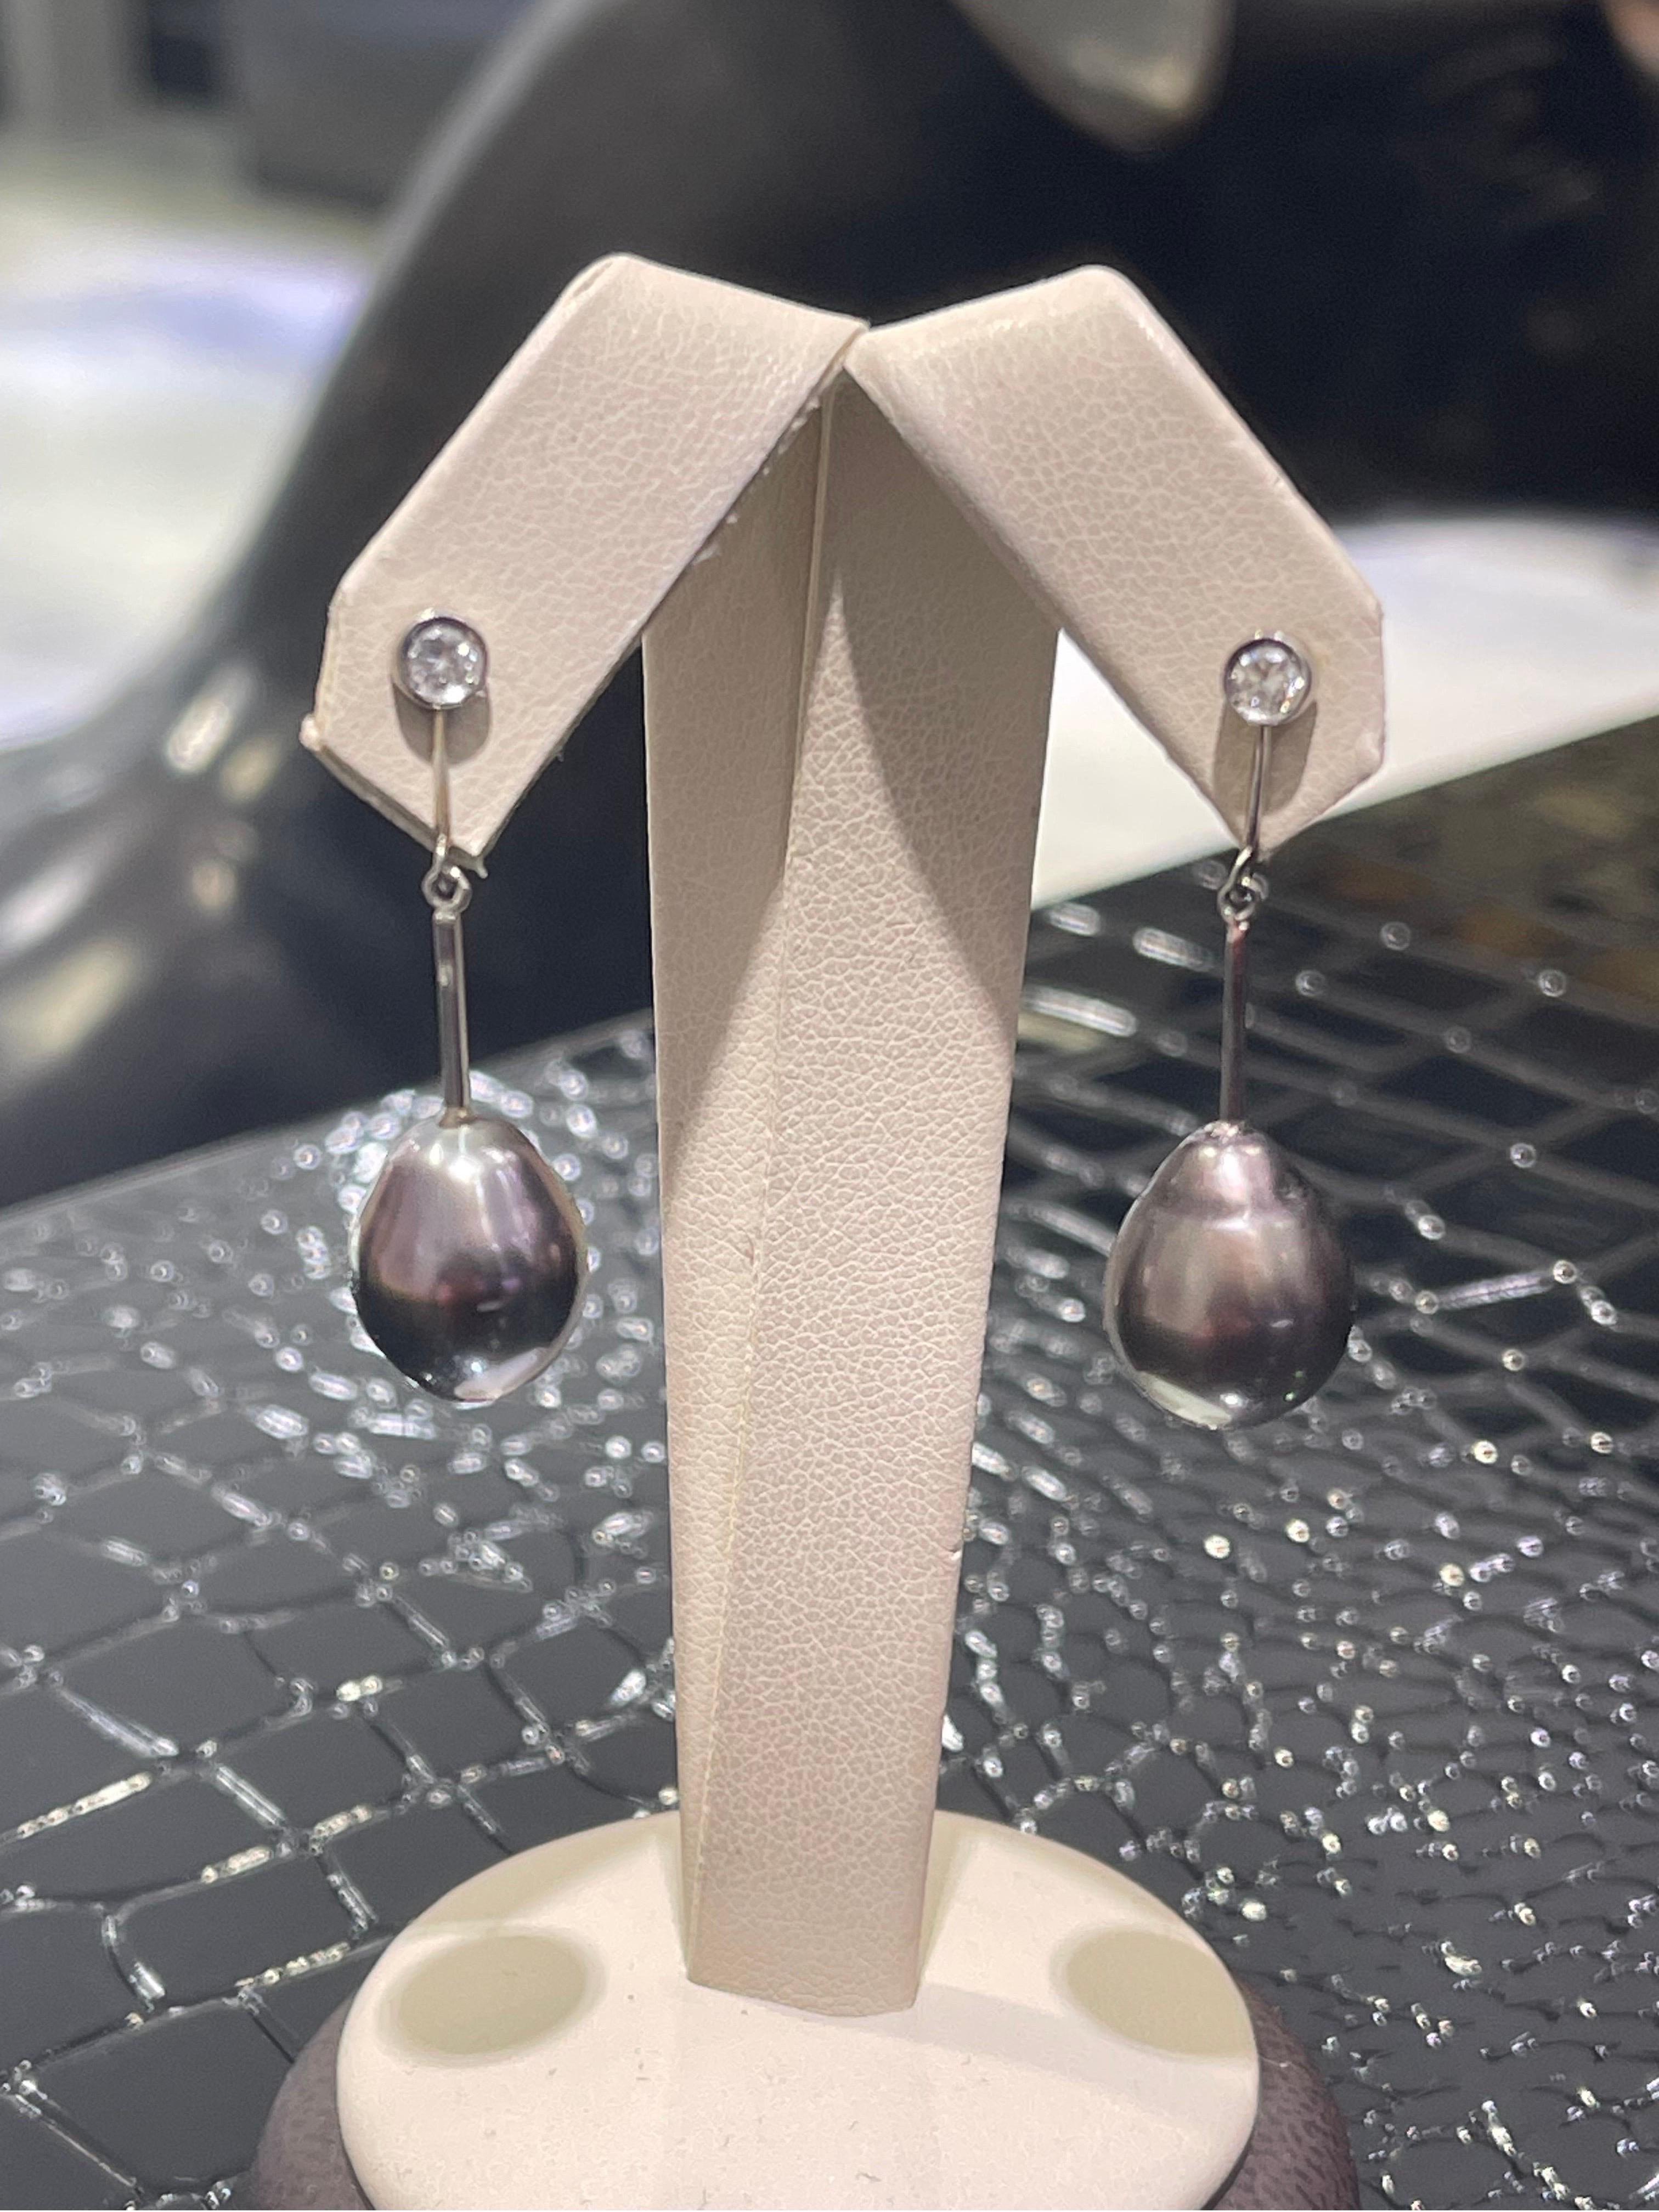 Black South Sea Pearl & Diamond Earrings In 14k White Gold.

Pears are in drop shape, approximately 13mm (length), 11mm (width).

Hanging length of the earrings is 1.5”.